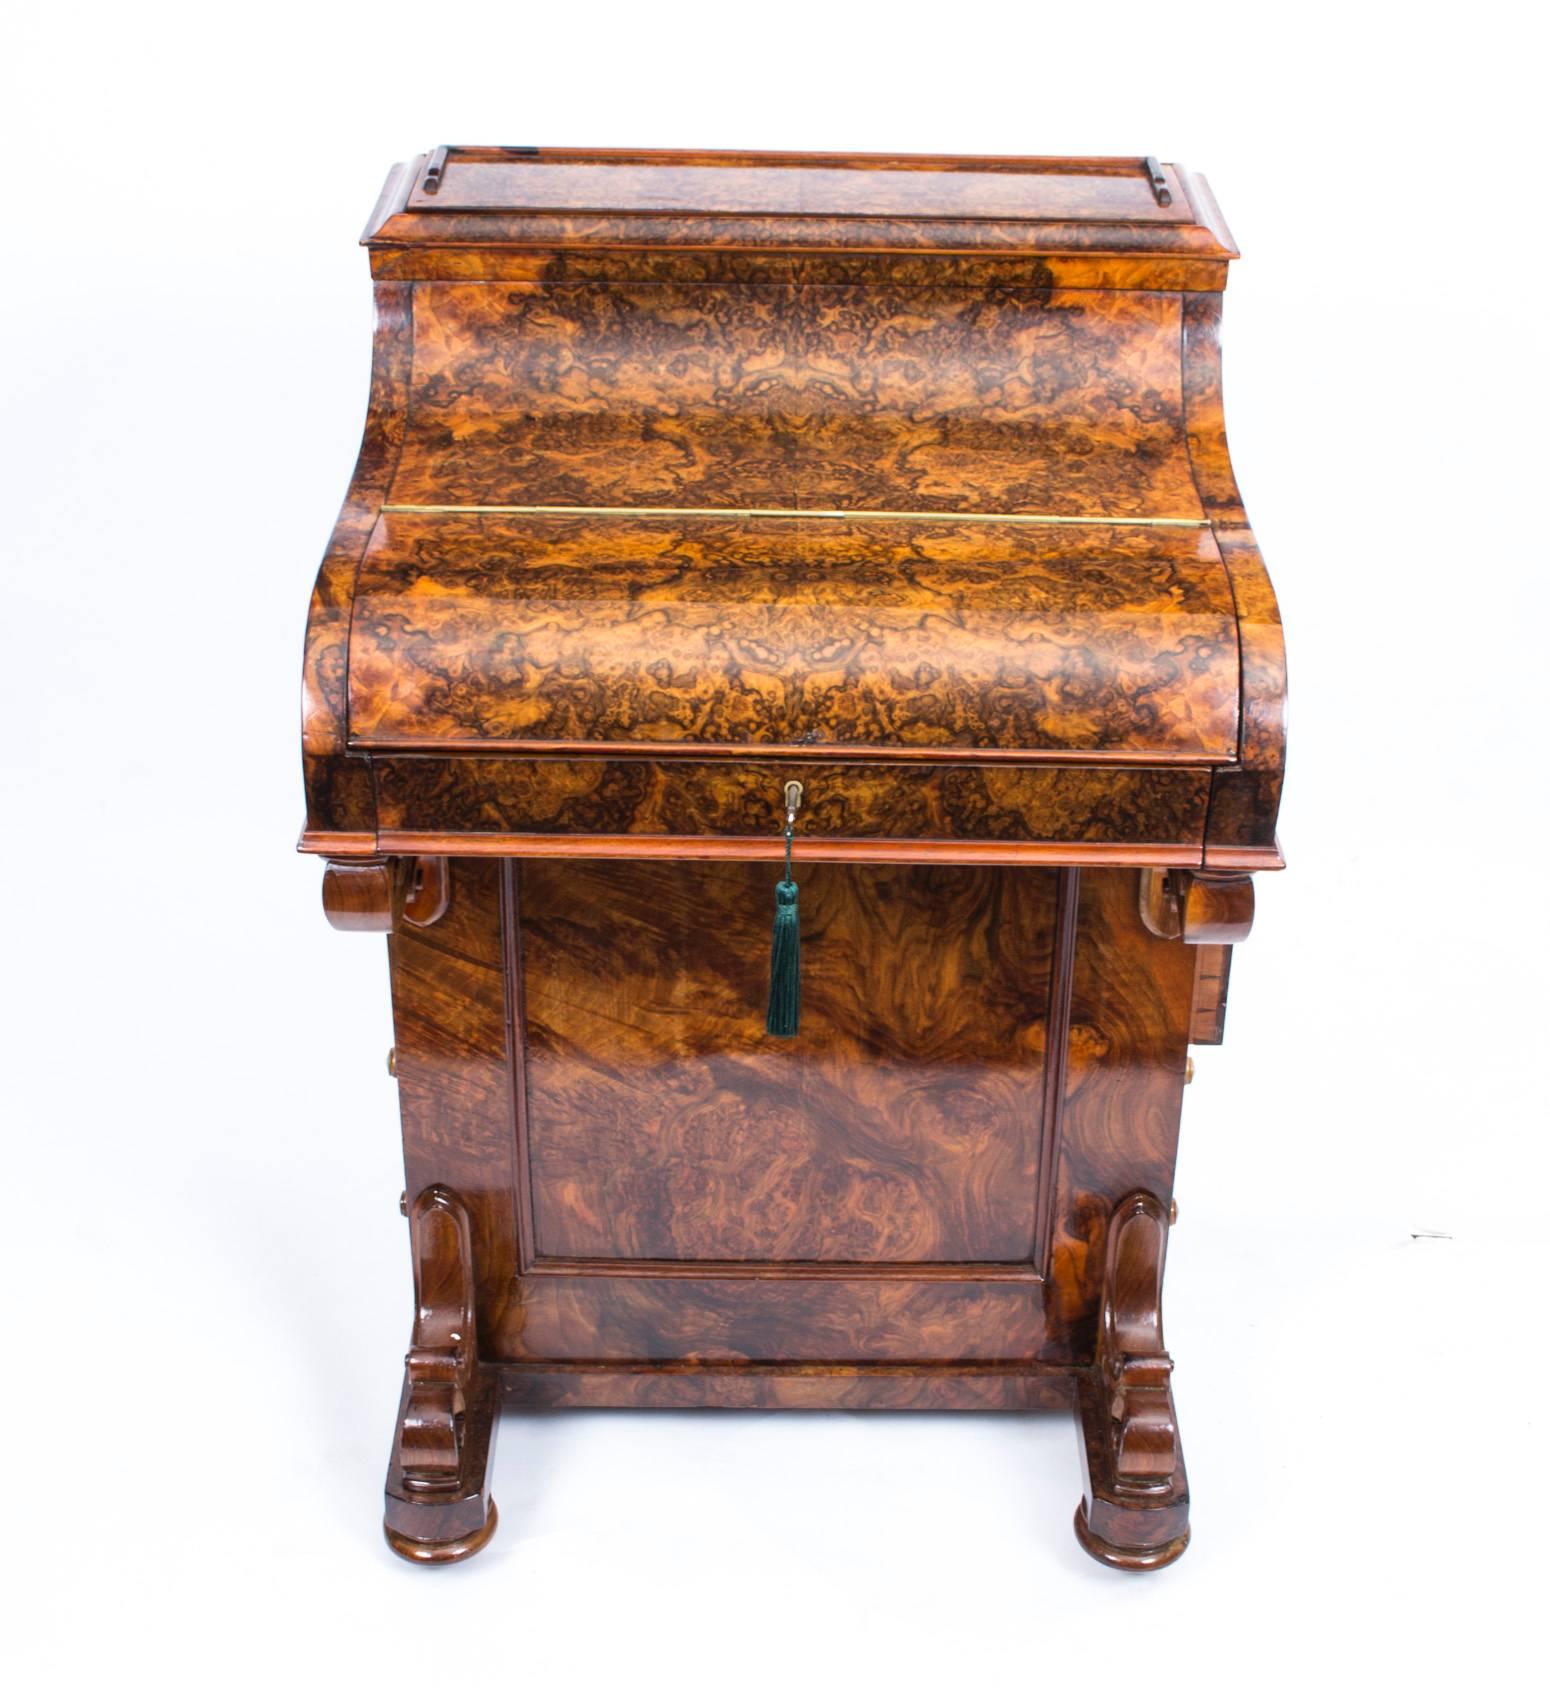 This is a gorgeous antique piano fronted Davenport desk circa 1860 in date.

It is crafted from fabulous burr walnut and features a beautiful hinged gilt tooled green leather inset.

It has been wonderfully made by a master craftsman, the